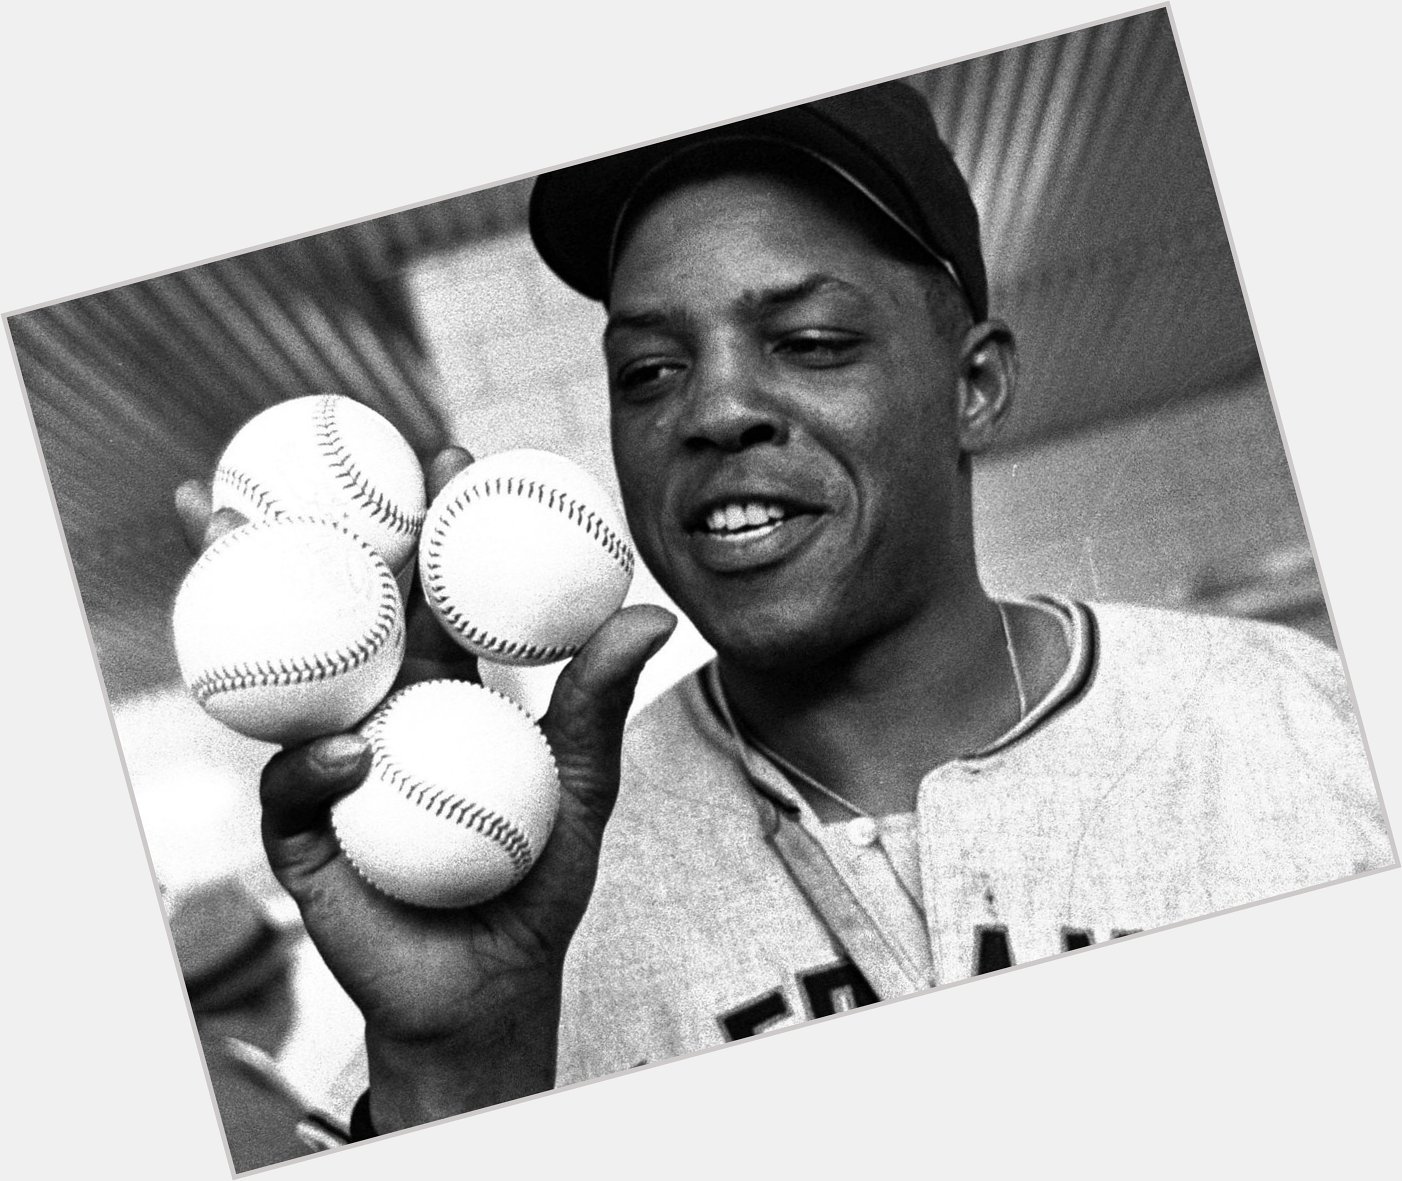 After hitting 4 homers in a game, Willie Mays took this epic photo.

Happy 89th birthday to a living legend. 